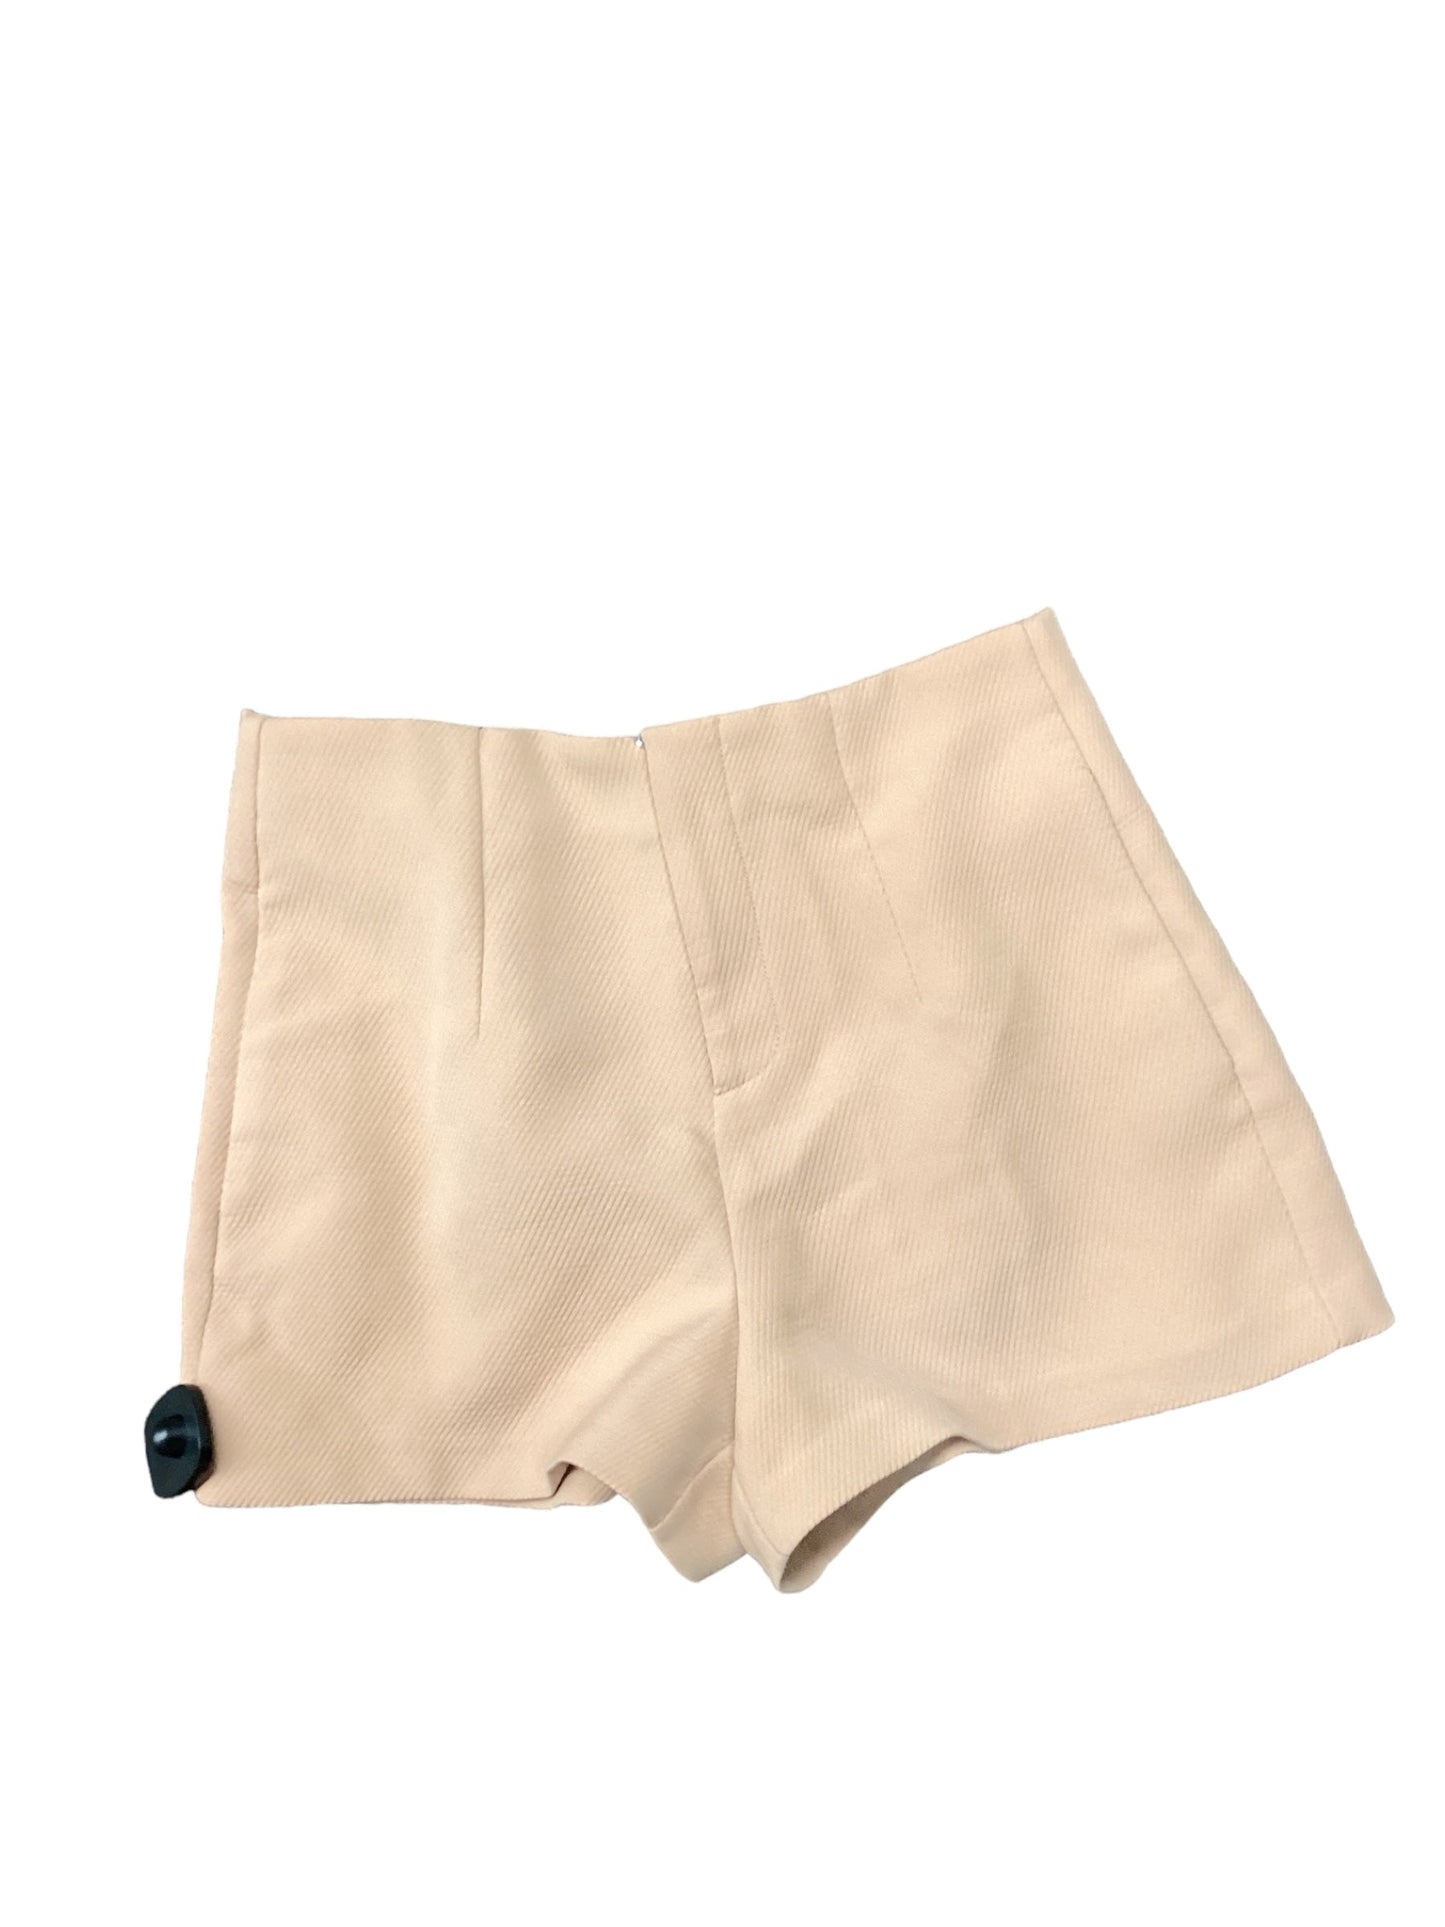 Tan Shorts Forever 21, Size M